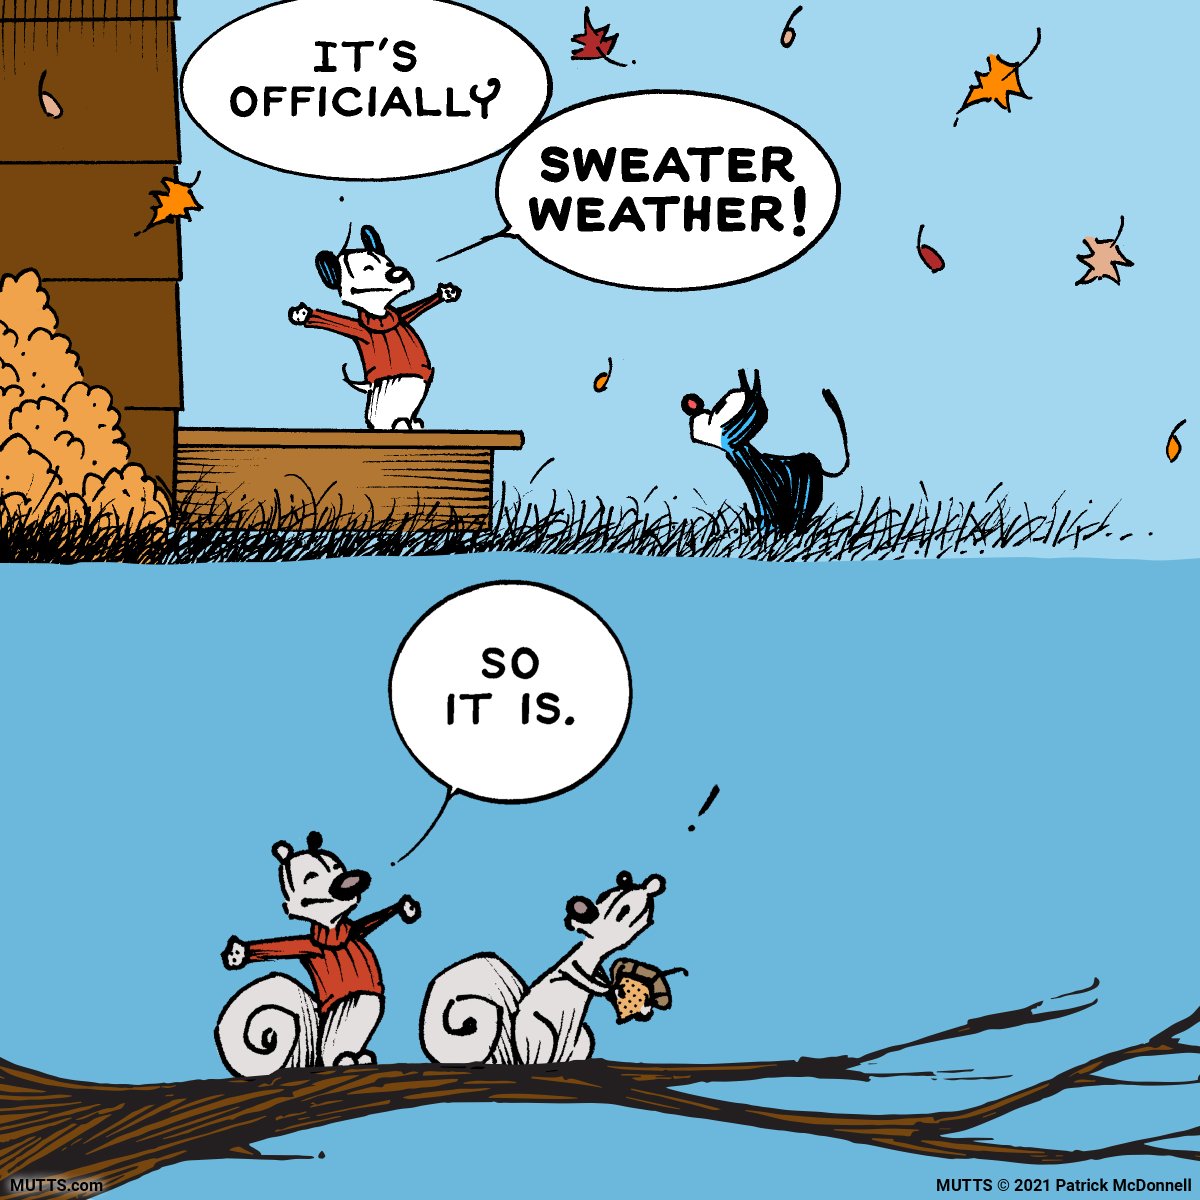 How's the weather in your neck of the woods? Time for sweaters yet?